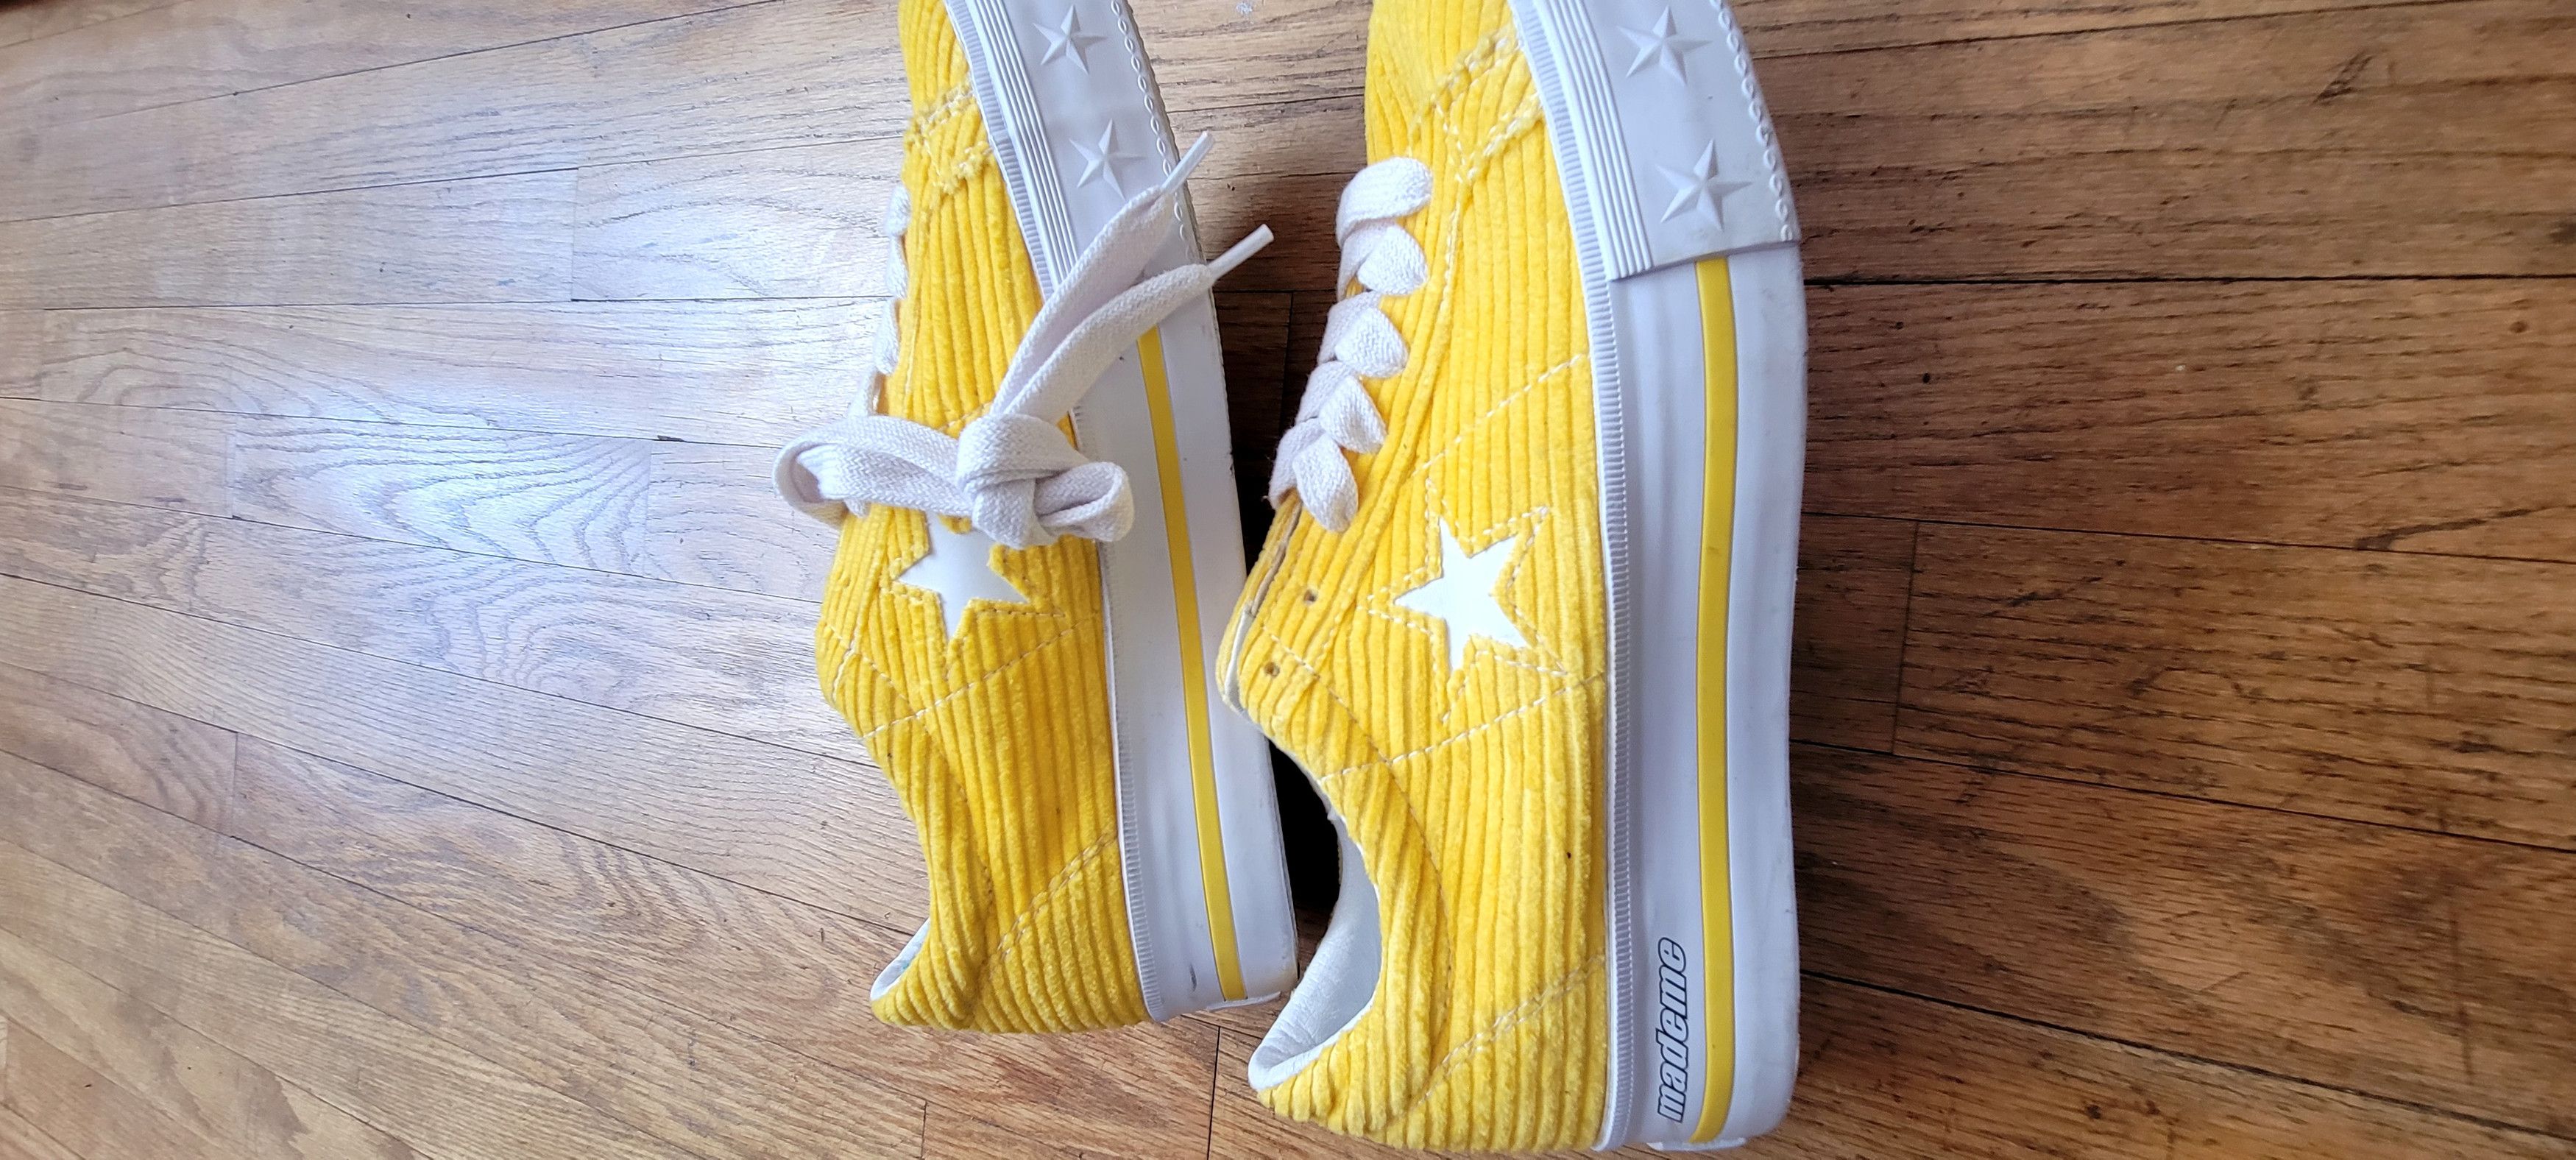 Converse Mademe Converse Size US 9 / IT 39 - 2 Preview